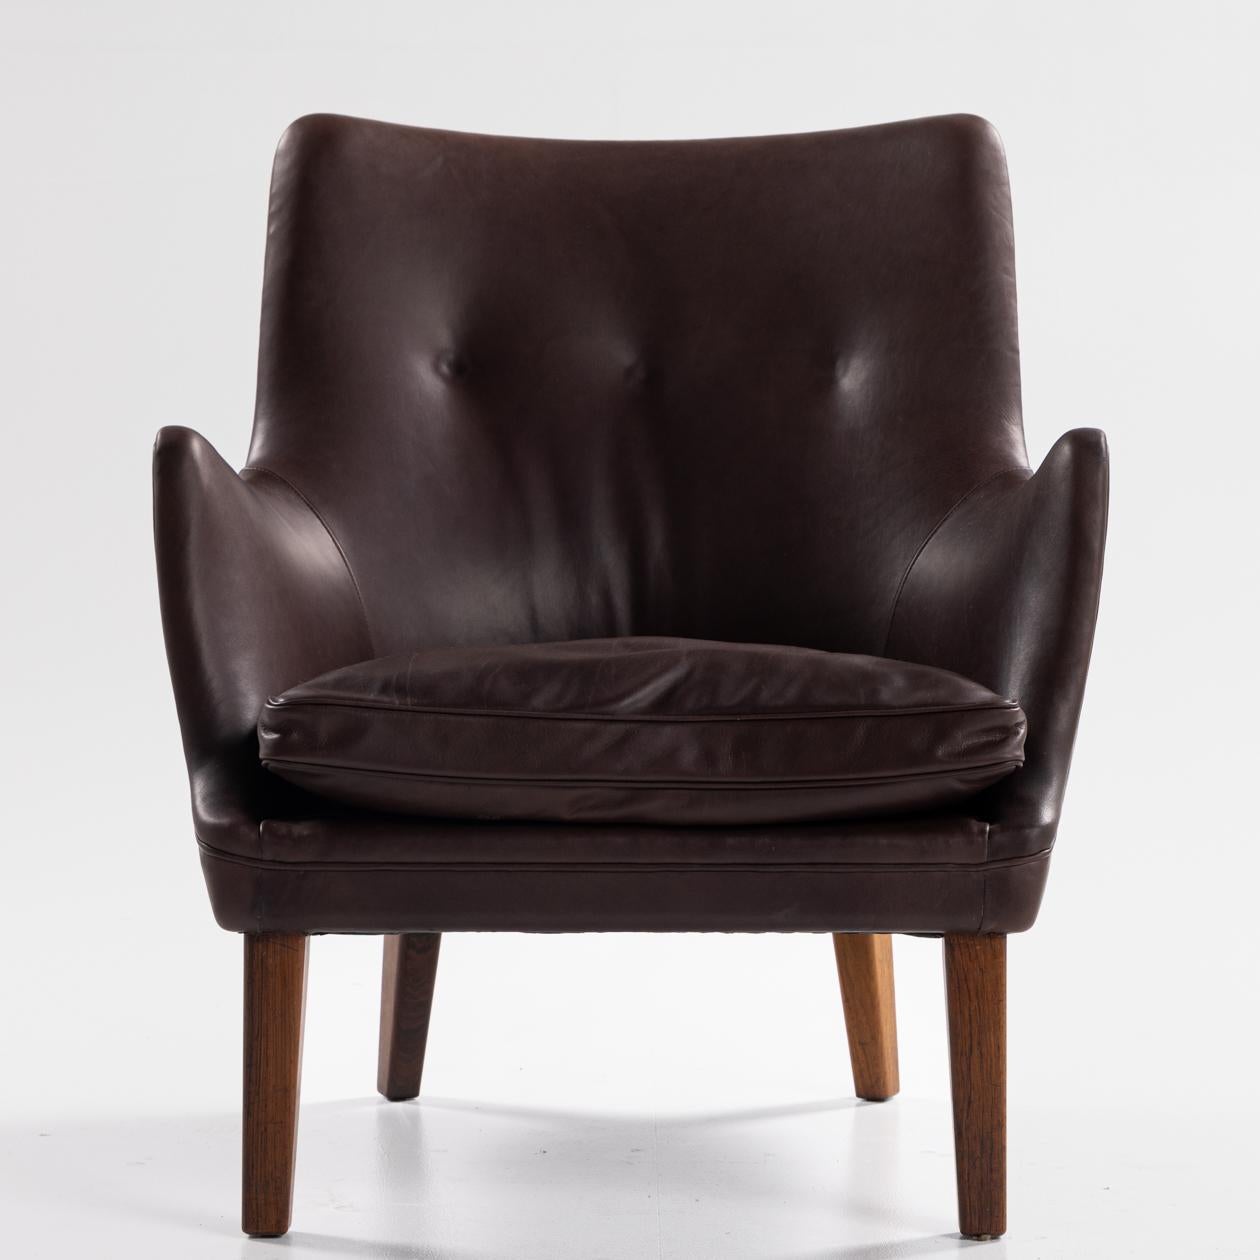 AV 53 - Easy chairs in new aniline leather (Victoria, colour: Ebony) with legs in solid Rio rosewood. Arne Vodder / Ivan Schlechter